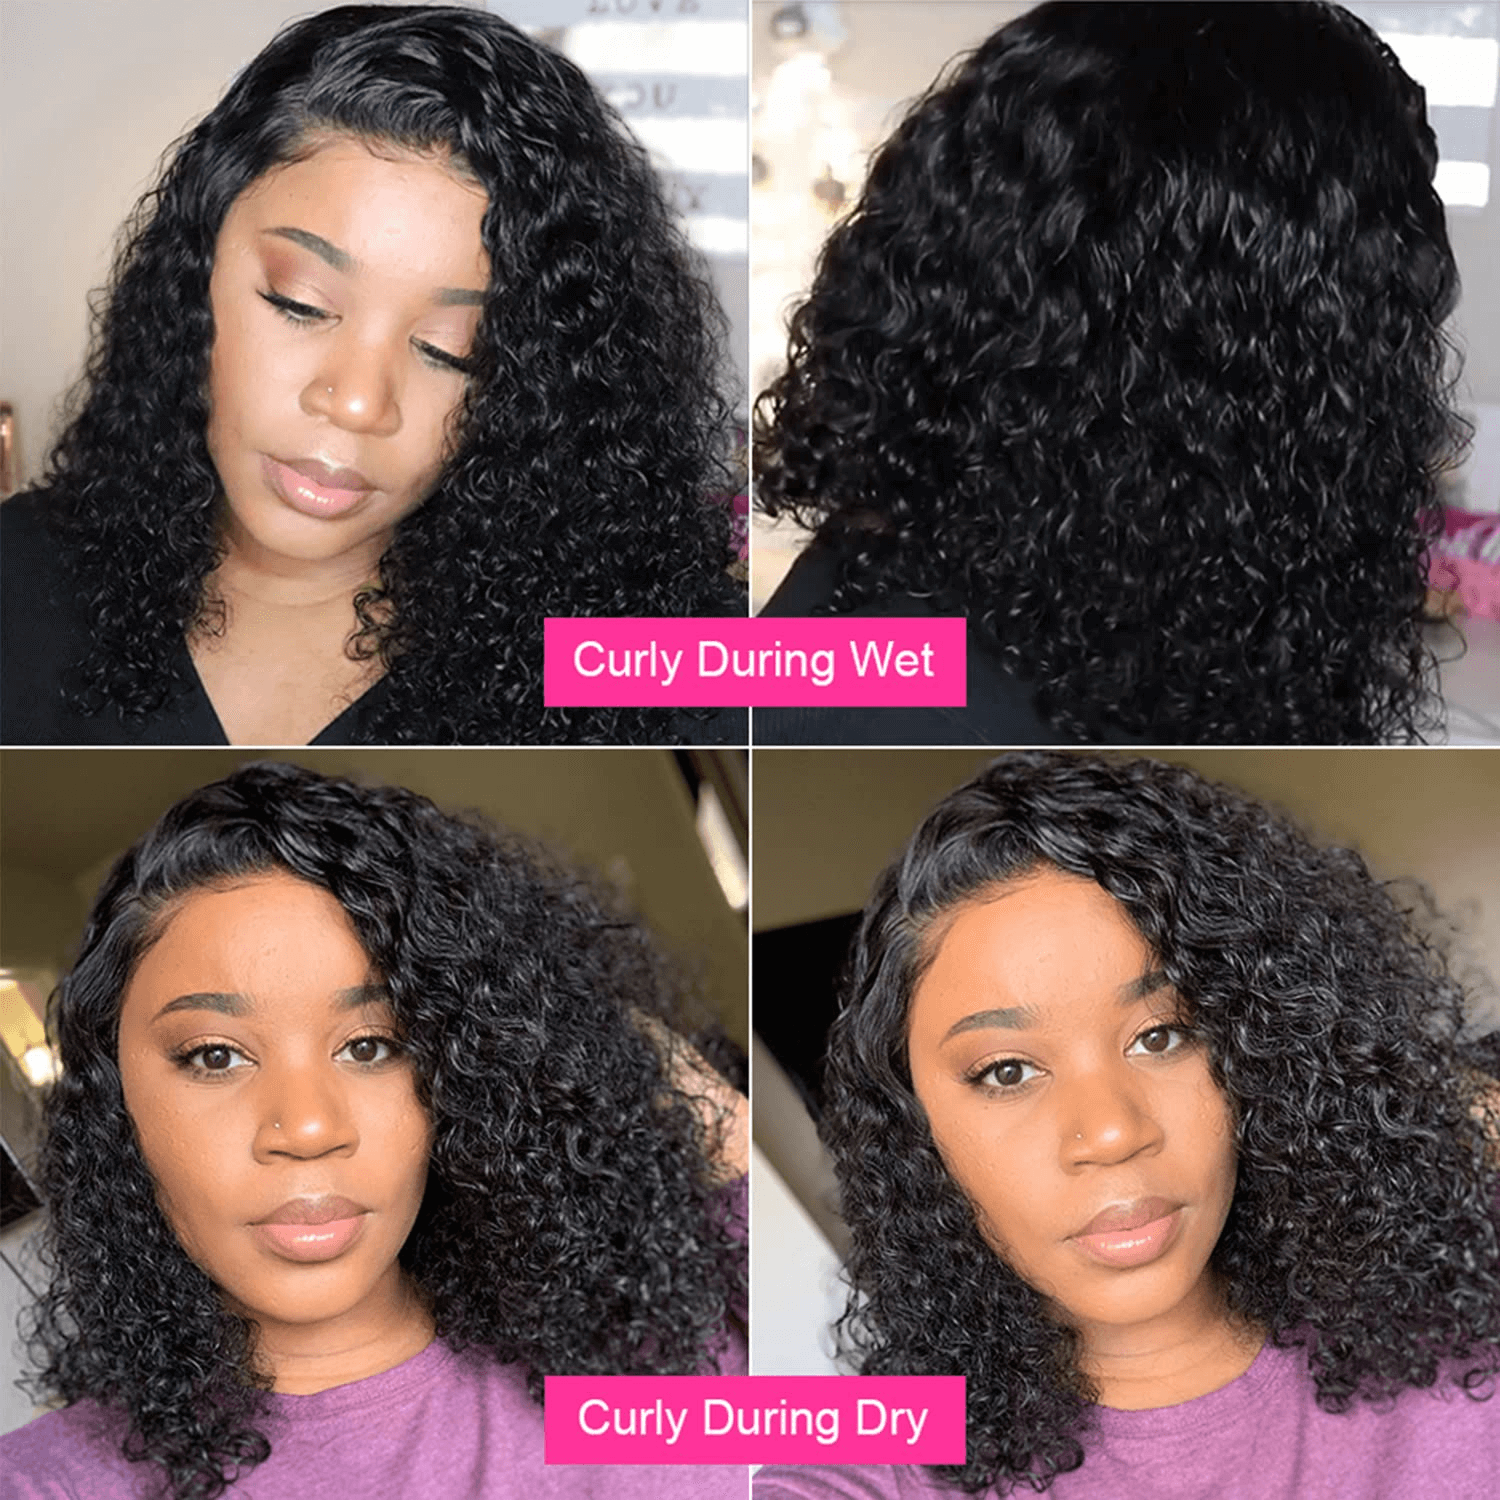 Wesface Wigs Glueless Curly Wigs Human Hair Pre Plucked Curly BOB Wig Human Hair 4x4 Lace Closure Wigs Human Hair Wigs for Black Women